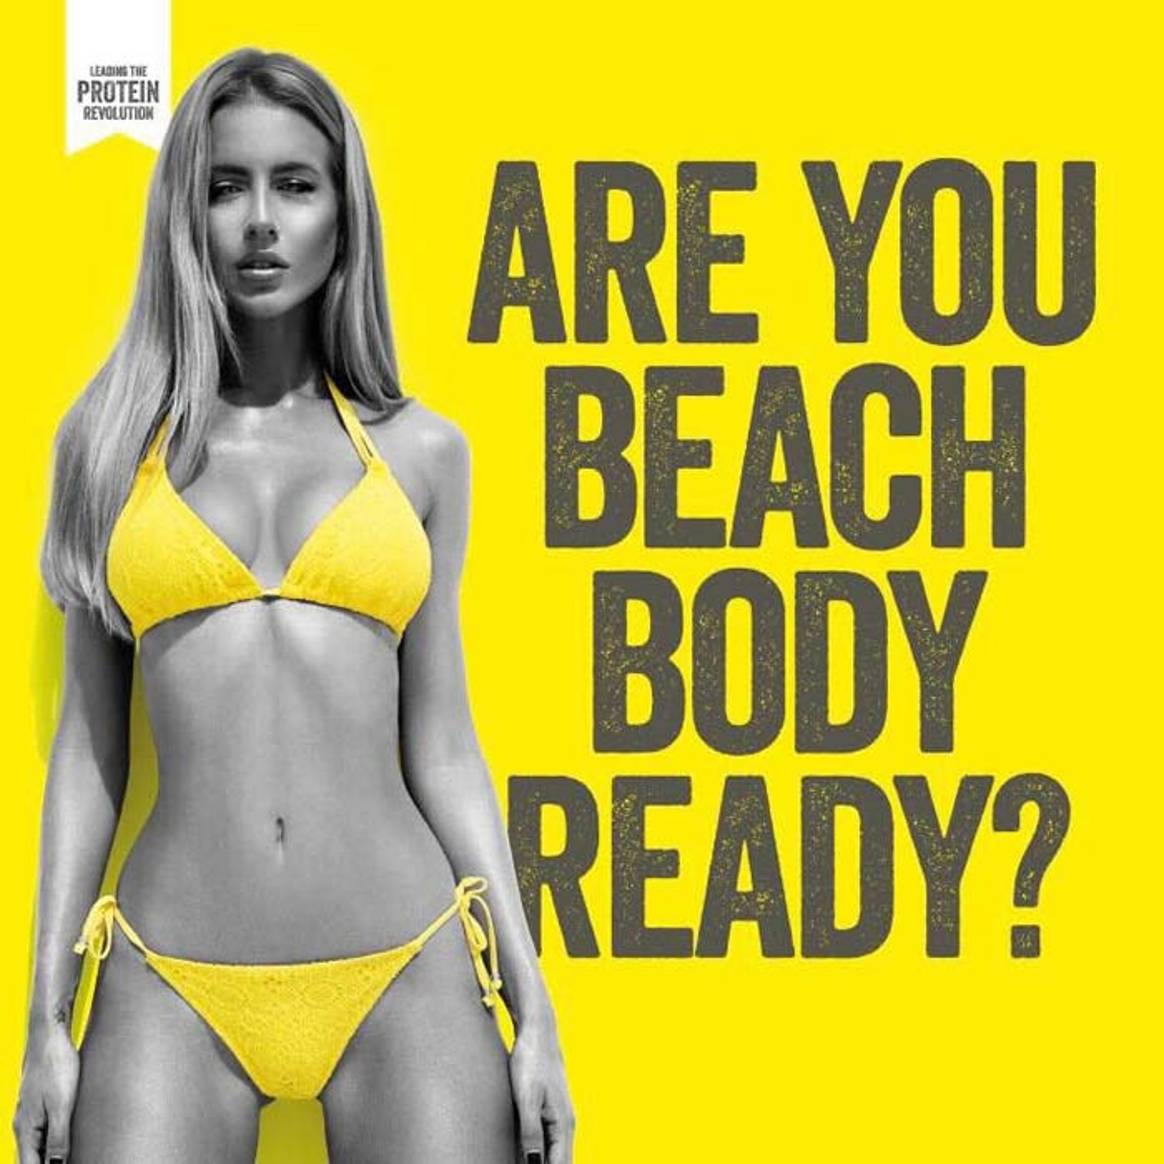 London Mayor says 'No' to unhealthy body images